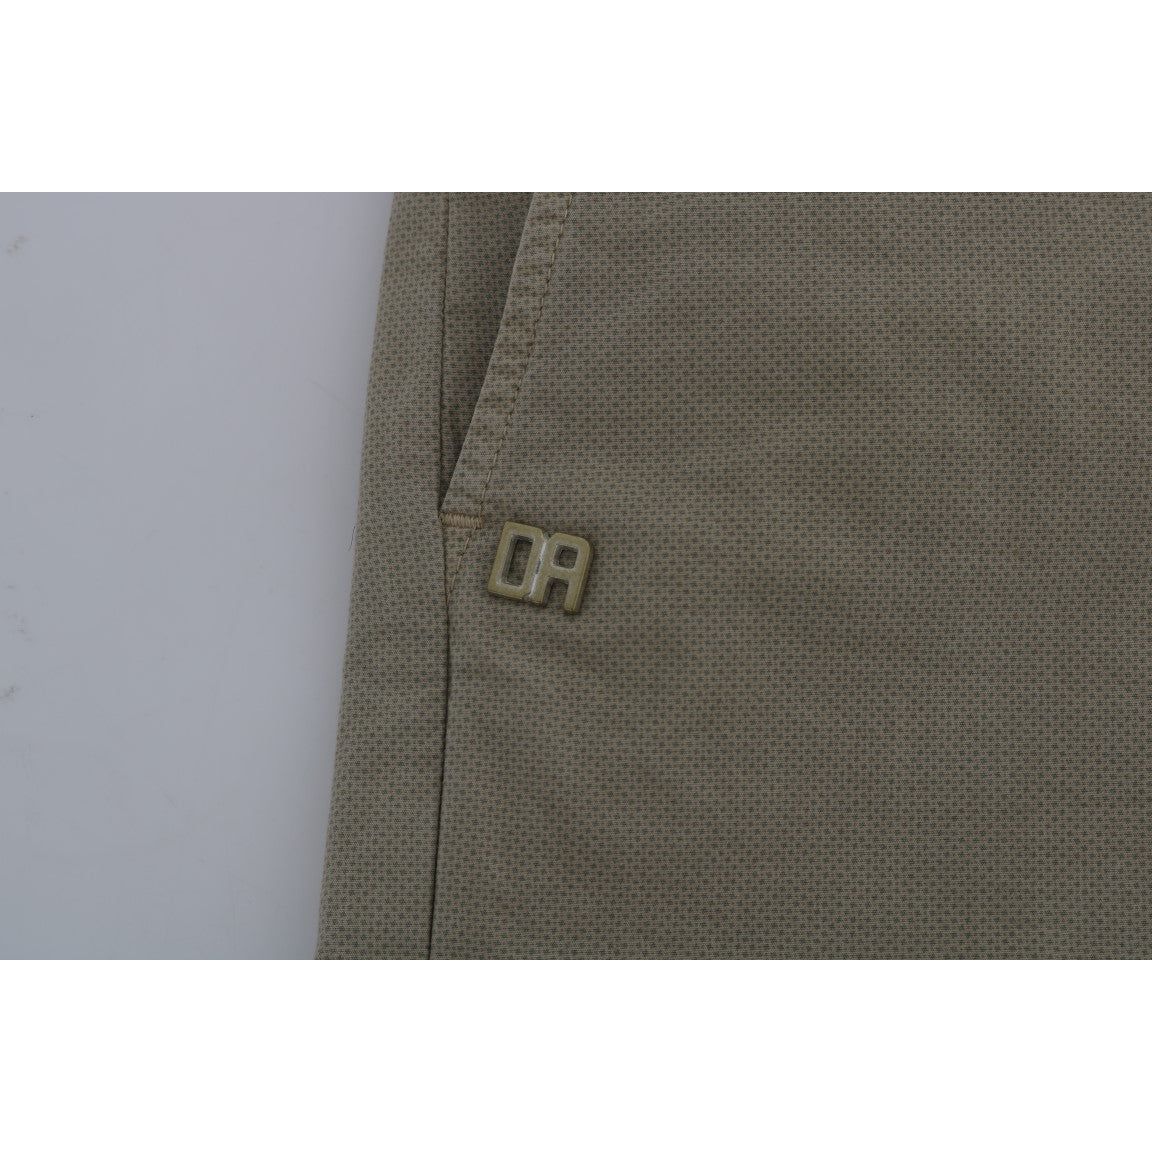 Daniele Alessandrini Beige Slim Fit Chinos for Sophisticated Style Jeans & Pants beige-cotton-stretch-slim-fit-chinos 457192-beige-cotton-stretch-slim-fit-chinos-5.jpg